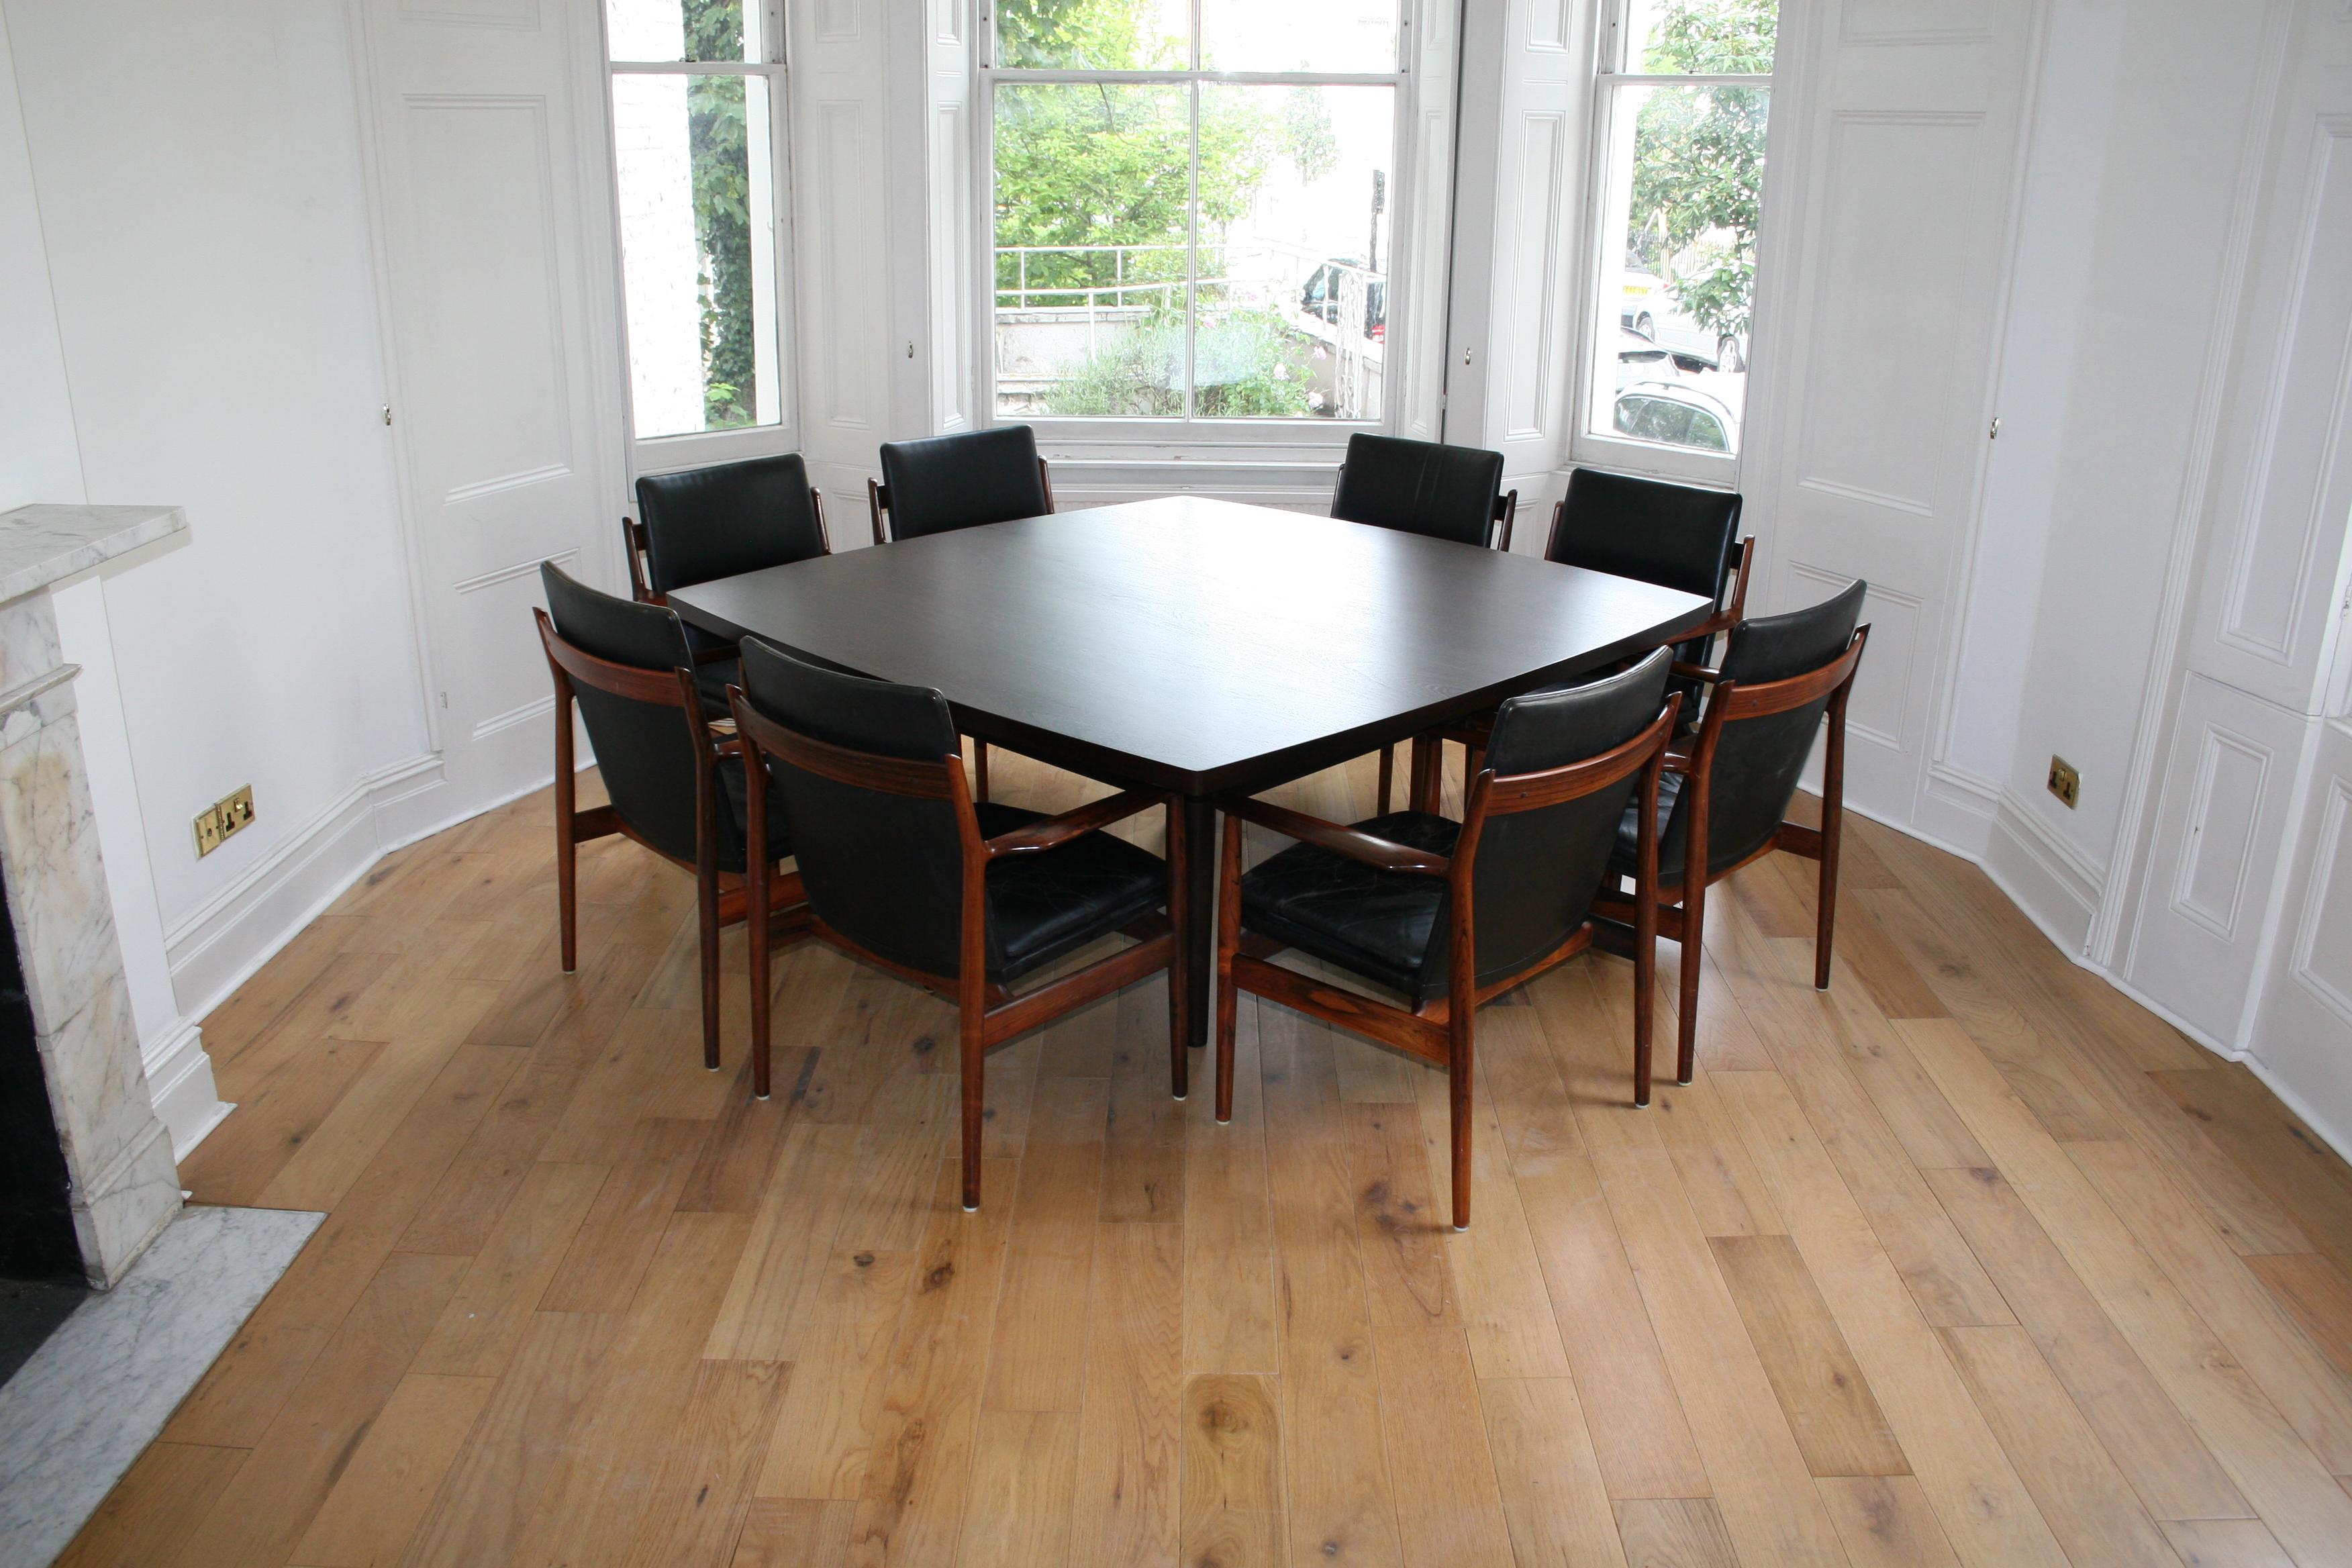 Made in Denmark about 2010 for a customer who has now downsized, the solid wenge top is made of 3 slabs of wenge sawn to make three pairs  of booked matched boards either side of the square top. Furthermore, the edges of the table show the ends of